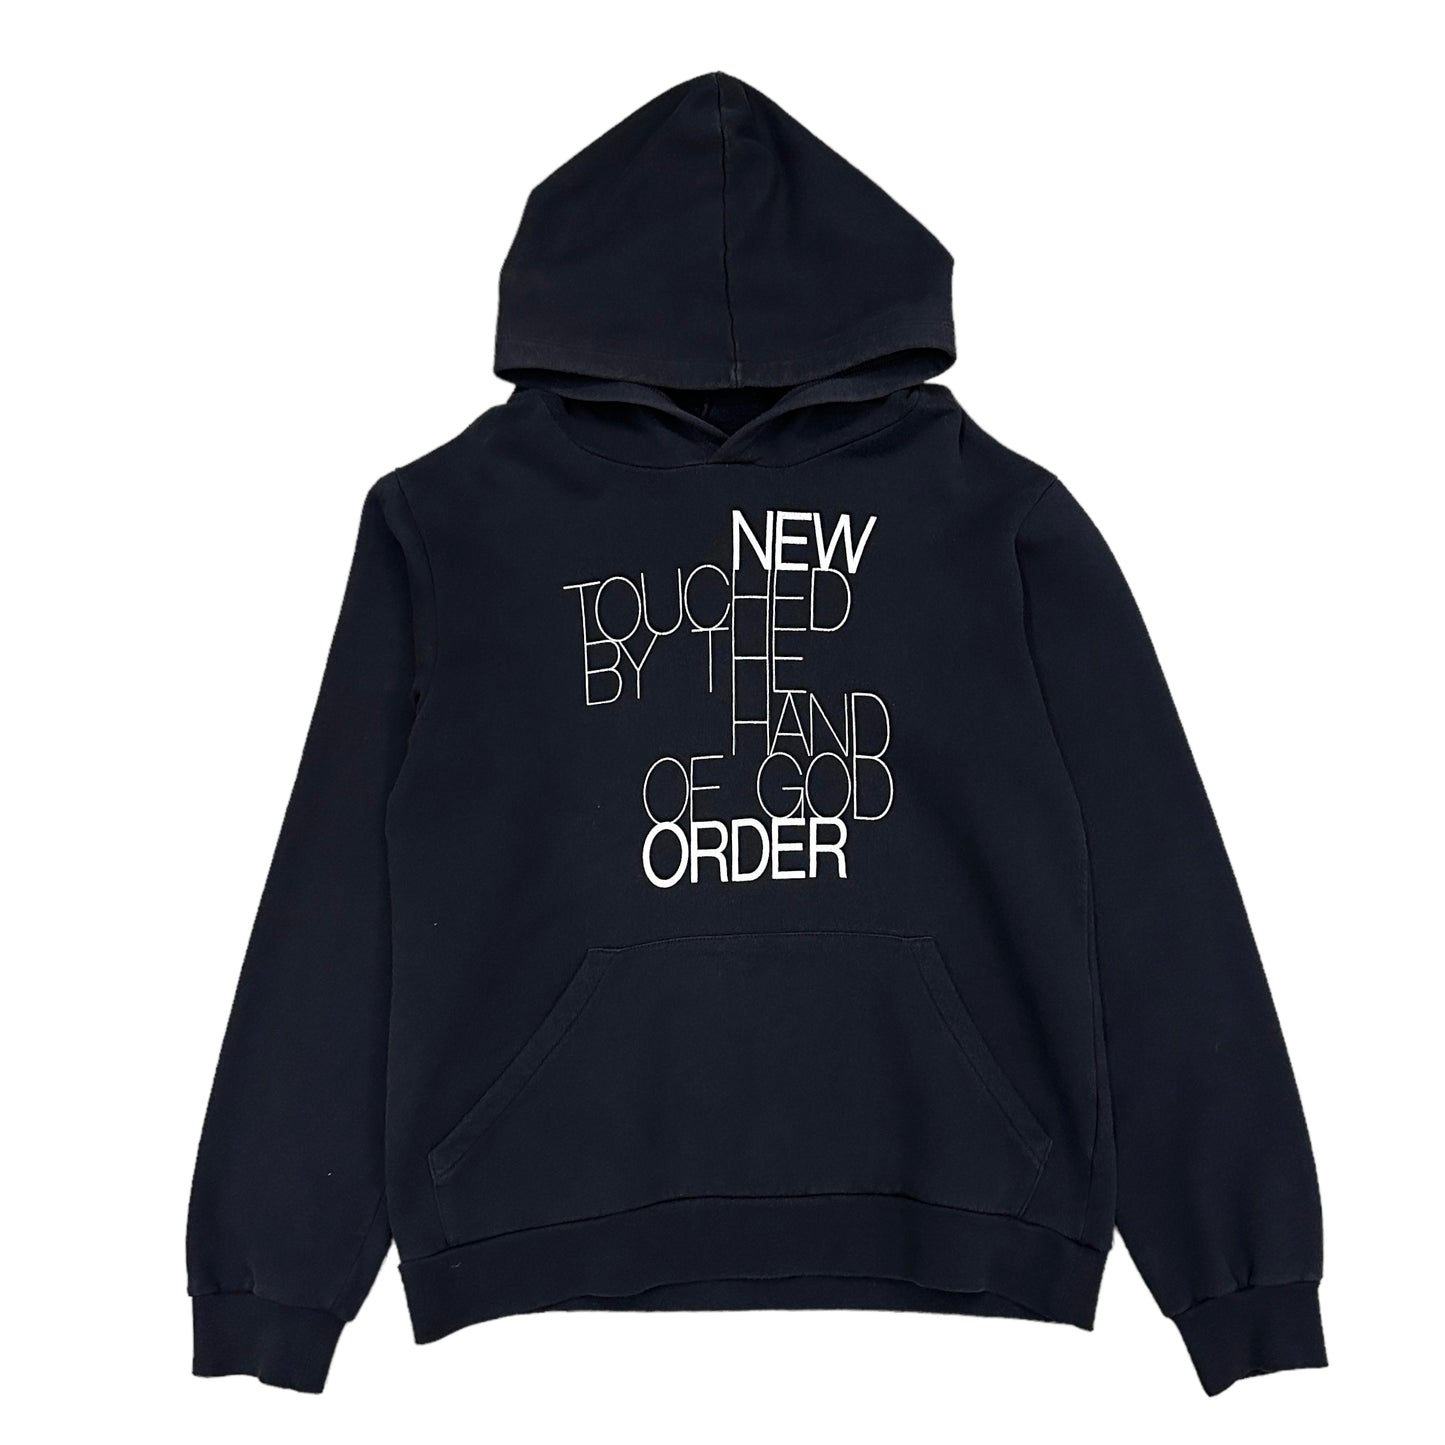 RAF SIMONS / 2003AW NEW ORDER "TOUCHED BY THE HAND OF GOD" HOODIE